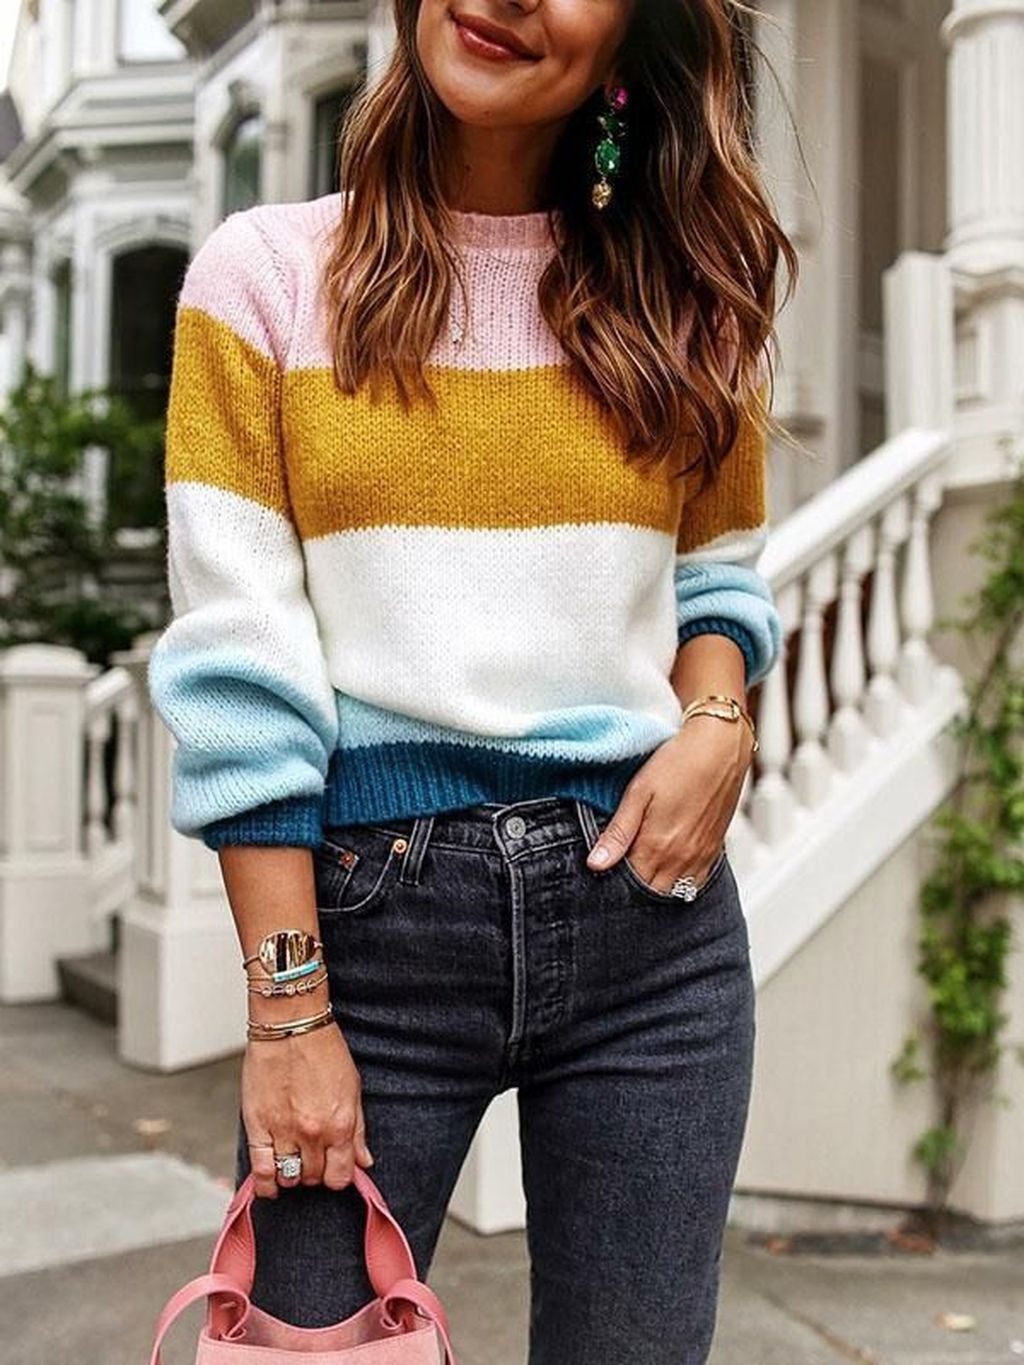 42 Unordinary Mismatched Outfits Ideas For Women